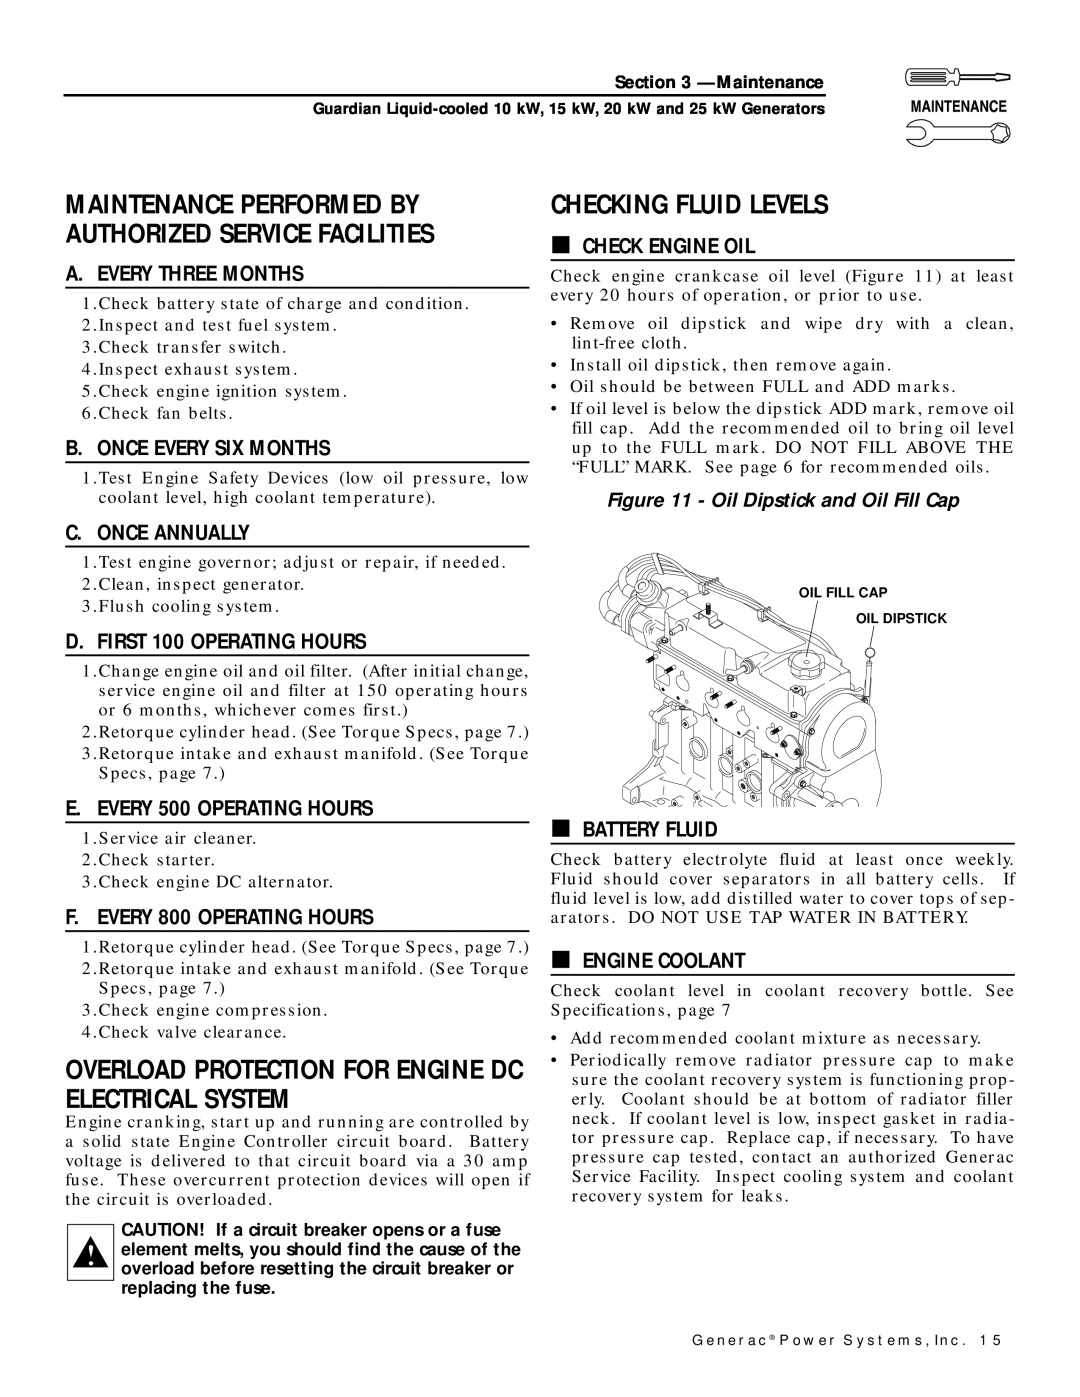 Generac Power Systems owner manual Checking Fluid Levels, Overload Protection For Engine Dc Electrical System 